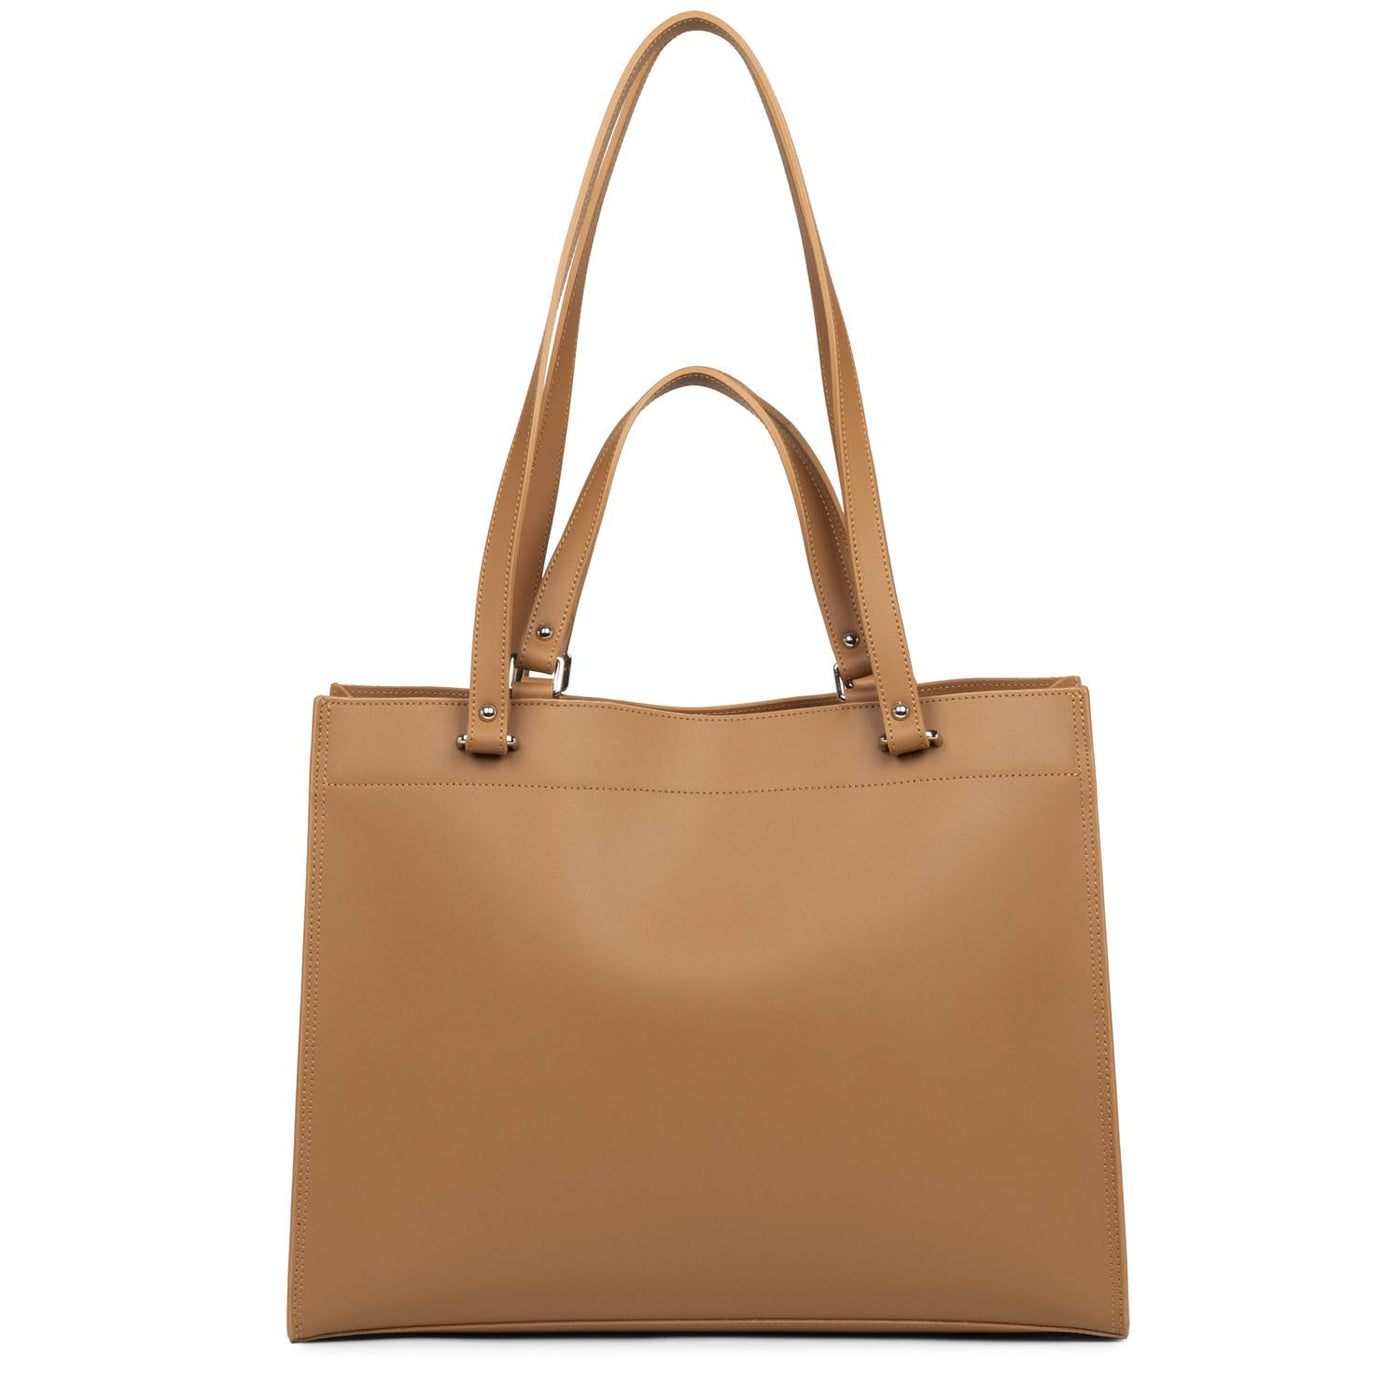 tote bag - pur & element city #couleur_camel-in-champagne